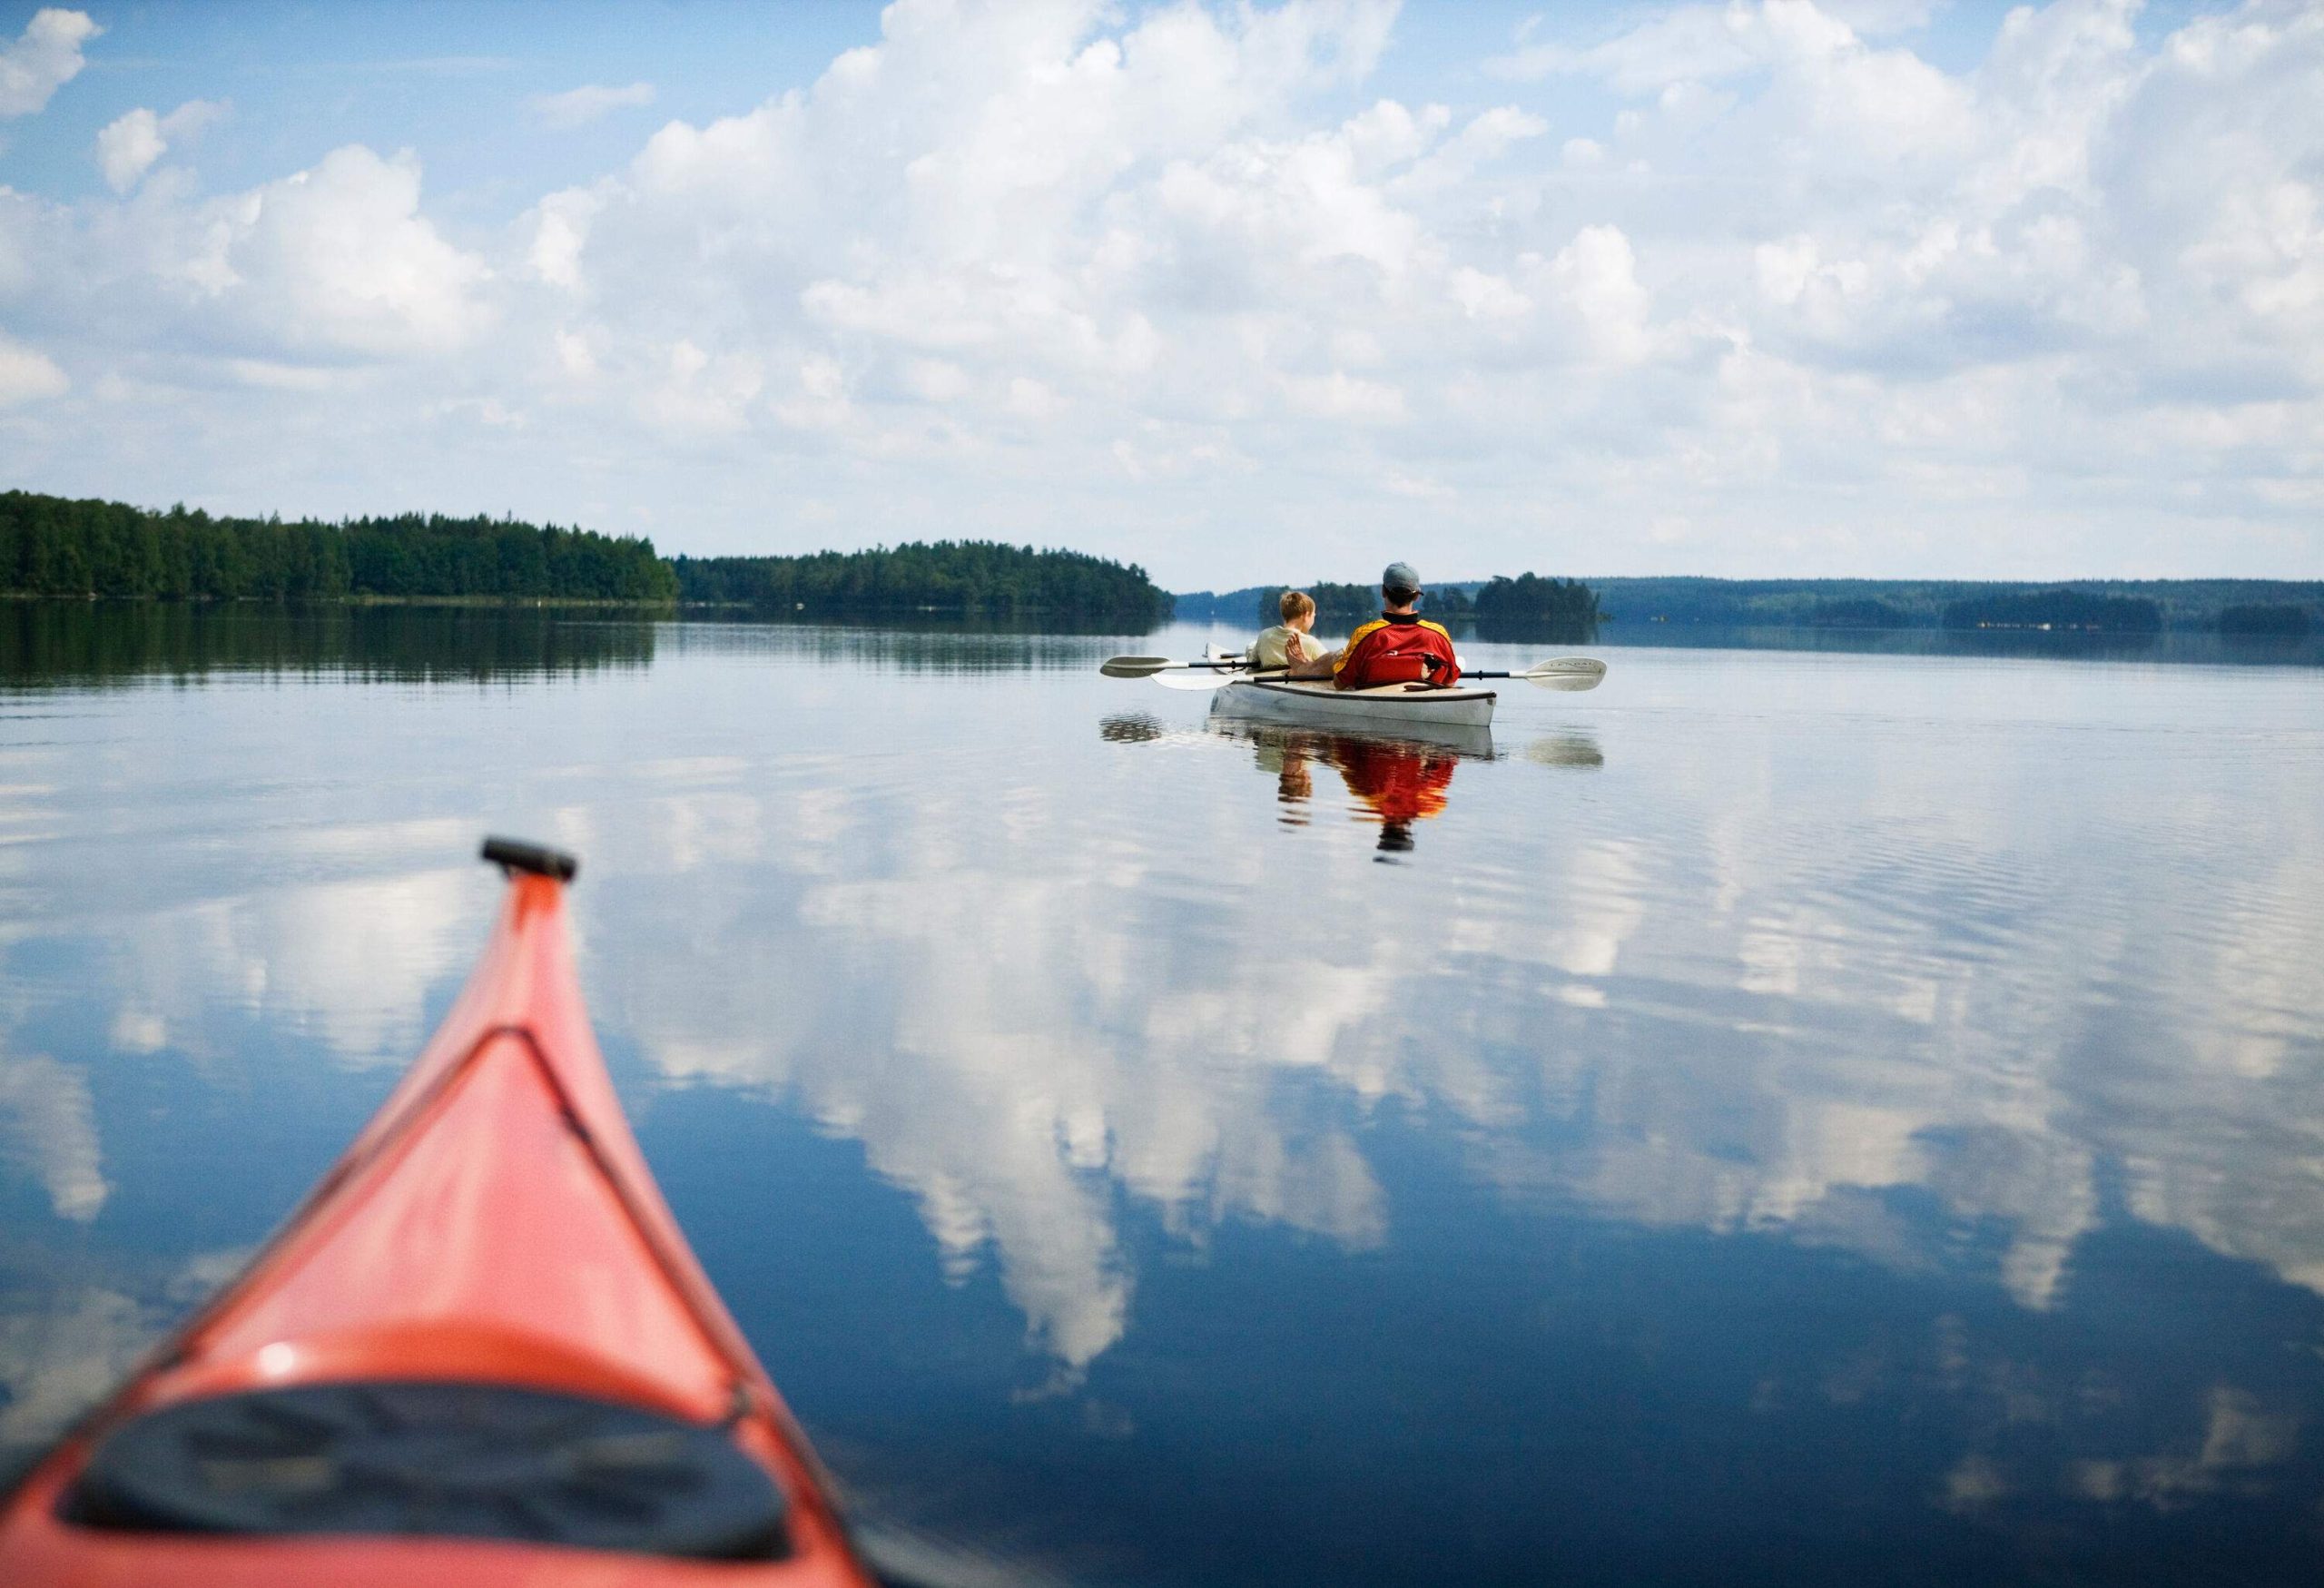 Two people canoeing on a crystal-clear lake under billowing clouds.